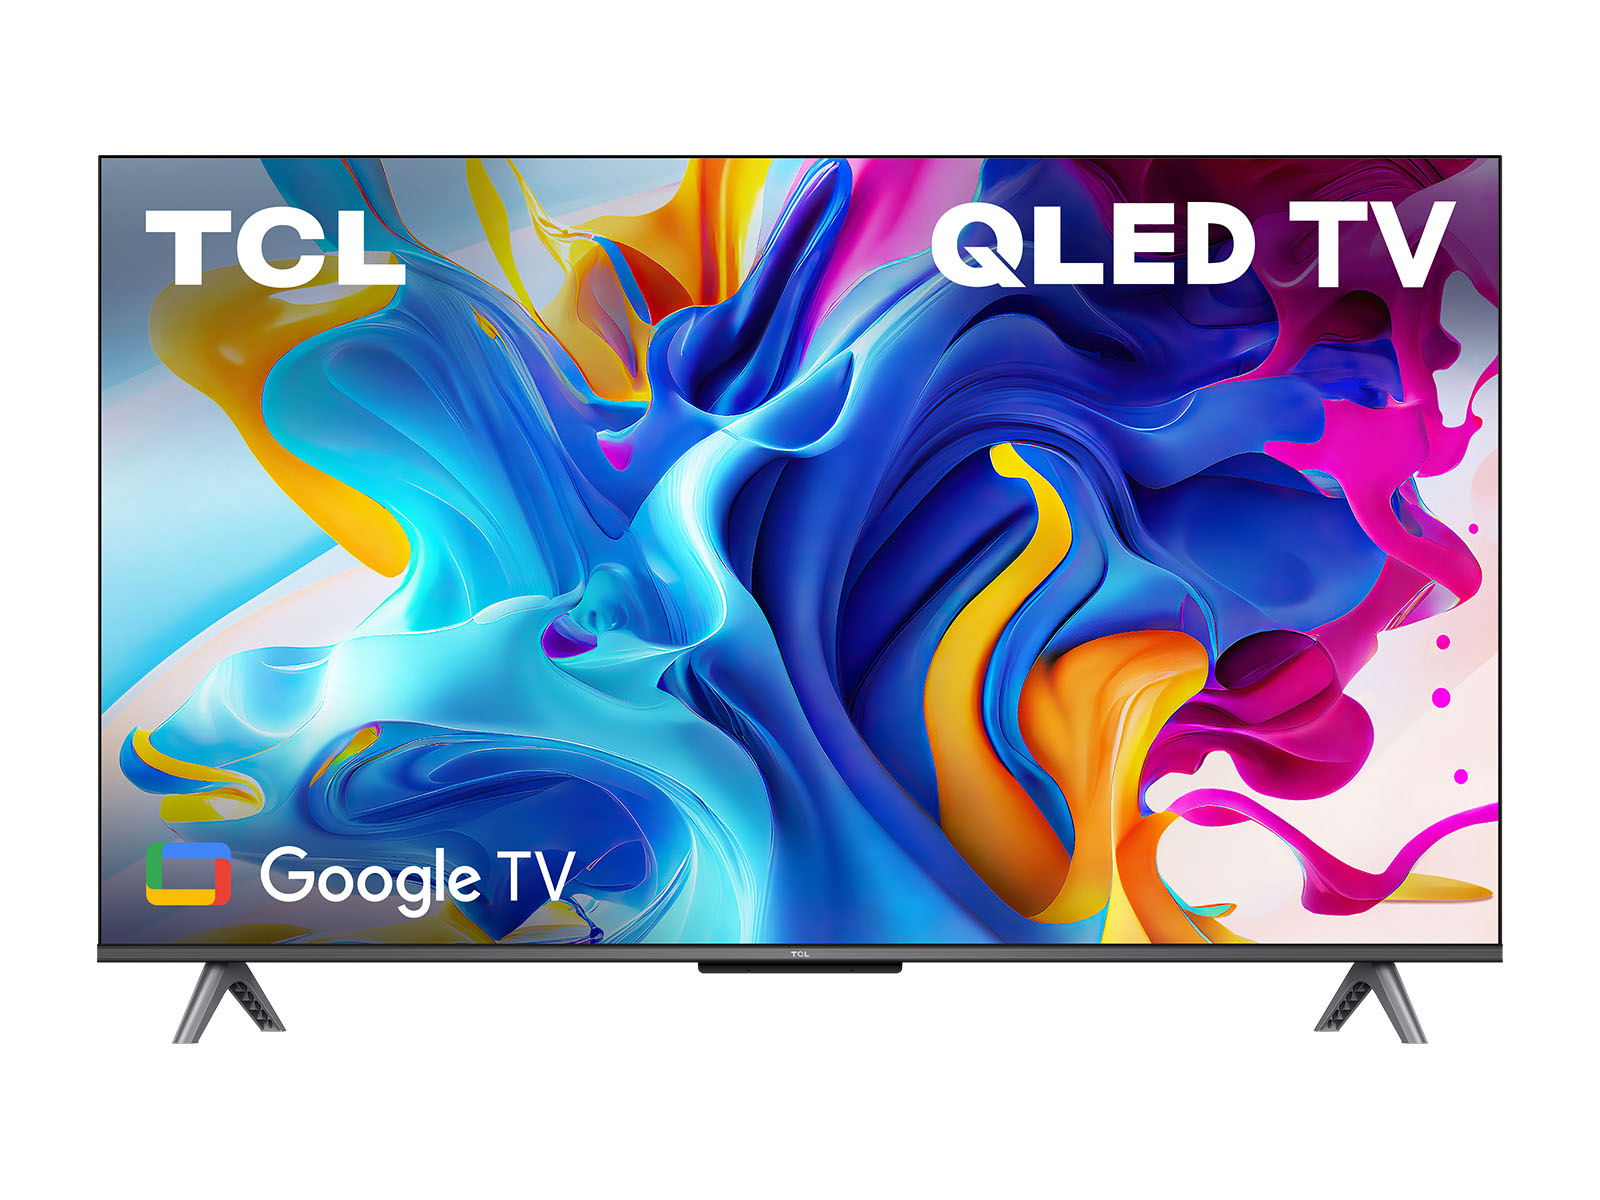 TCL C645 109 cm (43 inch) QLED 4K Ultra HD Google TV with Dolby Audio (2023  model)